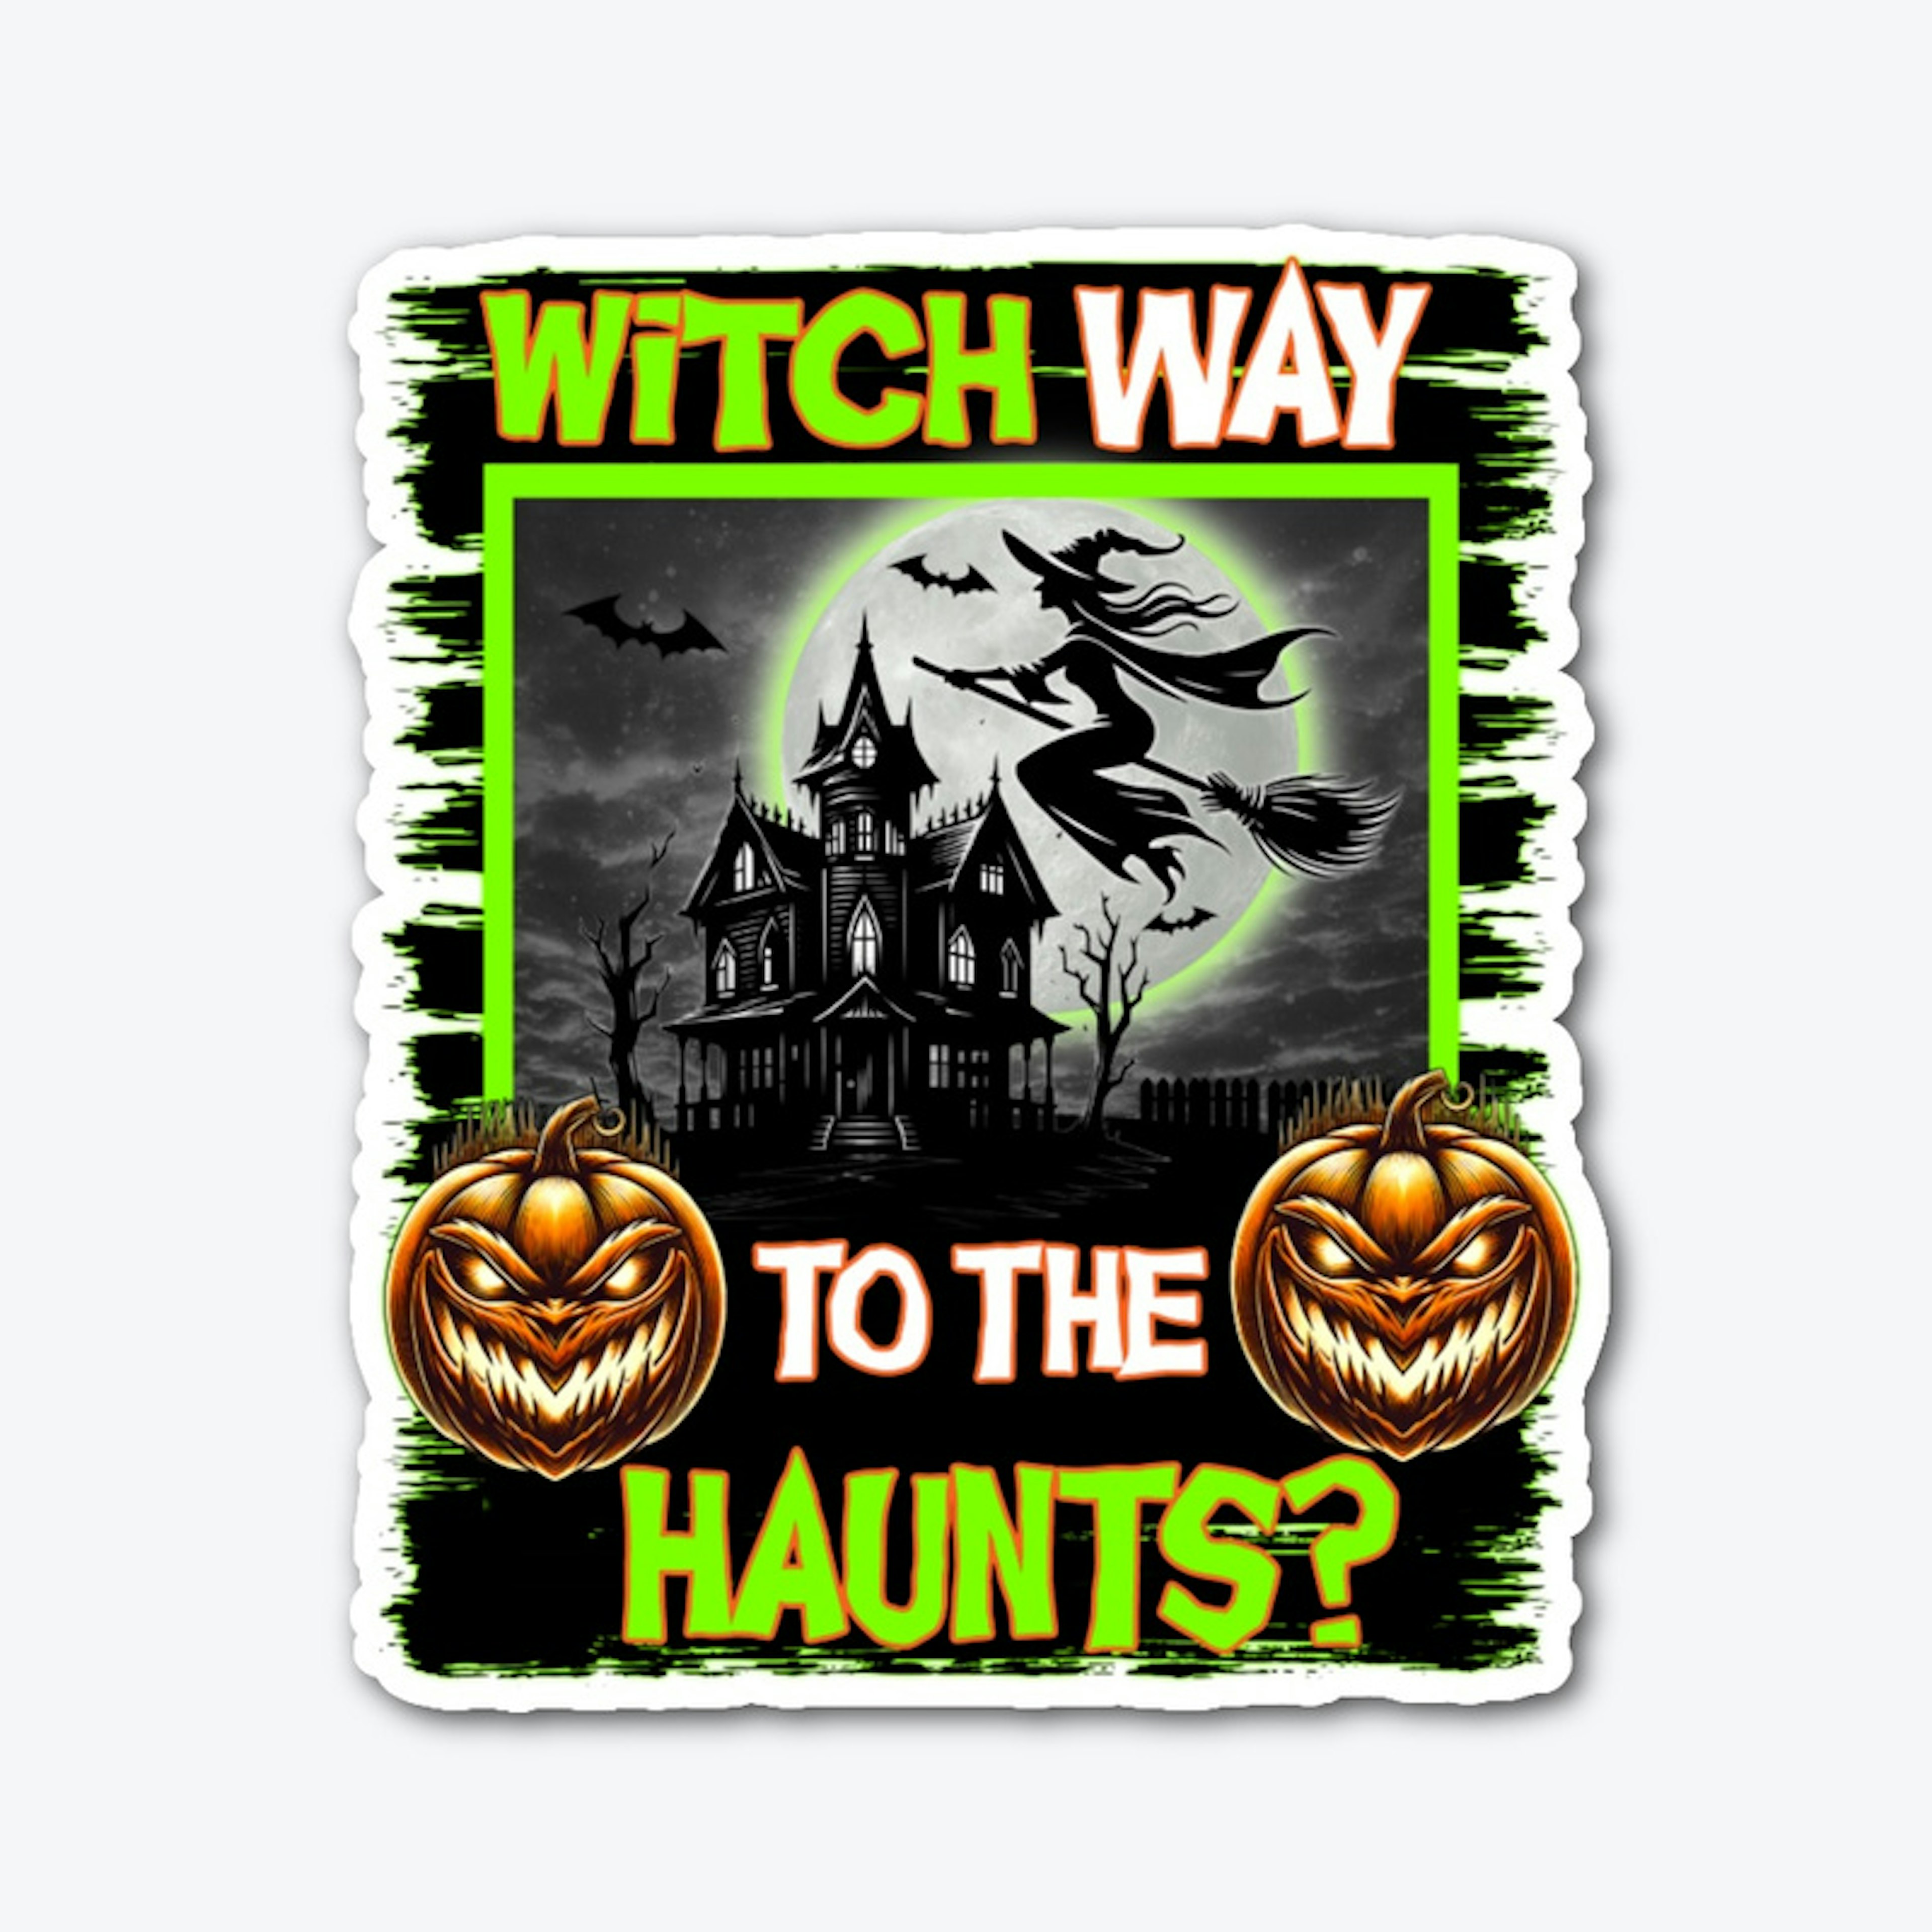 Witch Way To The Haunts?